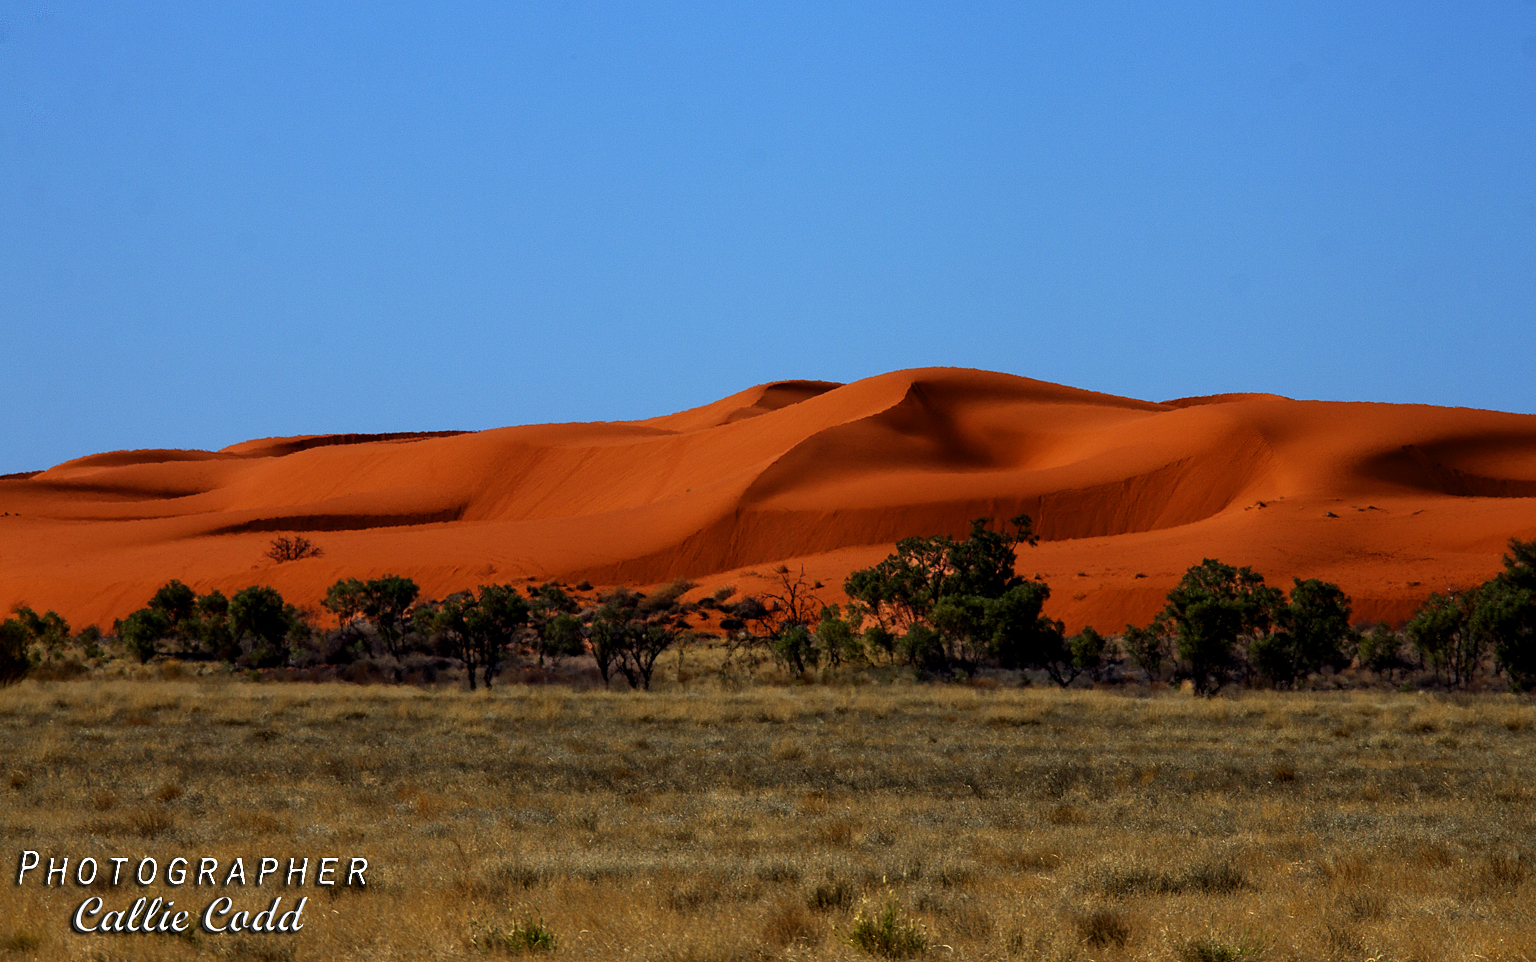 Inspiration from the Red Sand Dunes….